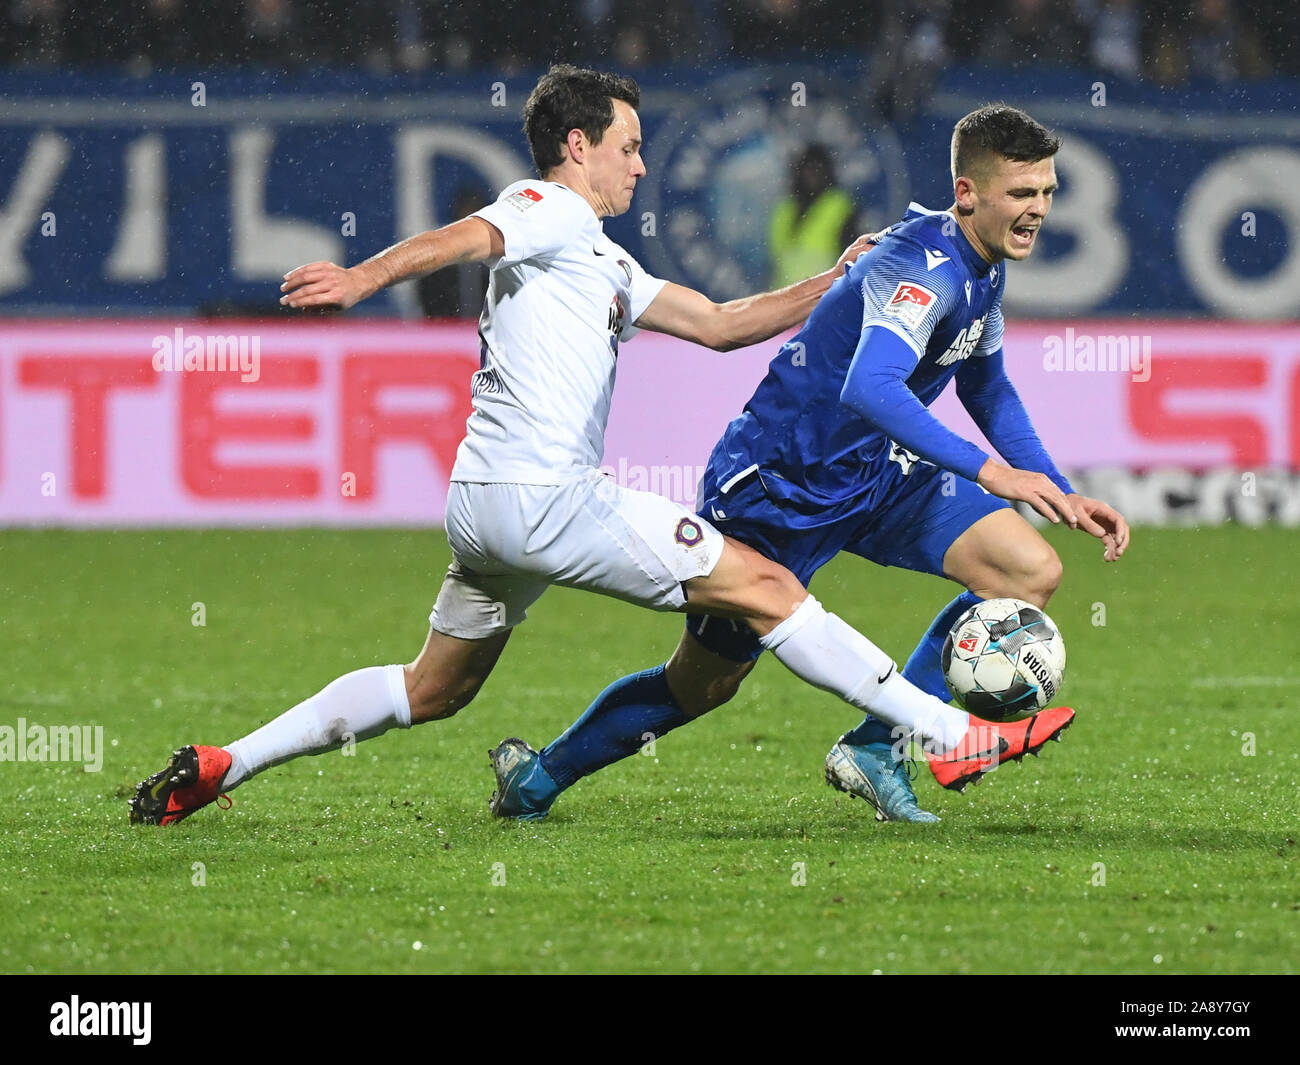 Karlsruhe, Germany. 11th Nov, 2019. Soccer: 2nd Bundesliga, Karlsruher SC - Erzgebirge Aue, 13th matchday in the Wildparkstadion. Marvin Wanitzek (l) from Karlsruhe and Clemens Fandrich from Aue fight for the ball. Credit: Uli Deck/dpa - IMPORTANT NOTE: In accordance with the requirements of the DFL Deutsche Fußball Liga or the DFB Deutscher Fußball-Bund, it is prohibited to use or have used photographs taken in the stadium and/or the match in the form of sequence images and/or video-like photo sequences./dpa/Alamy Live News Stock Photo